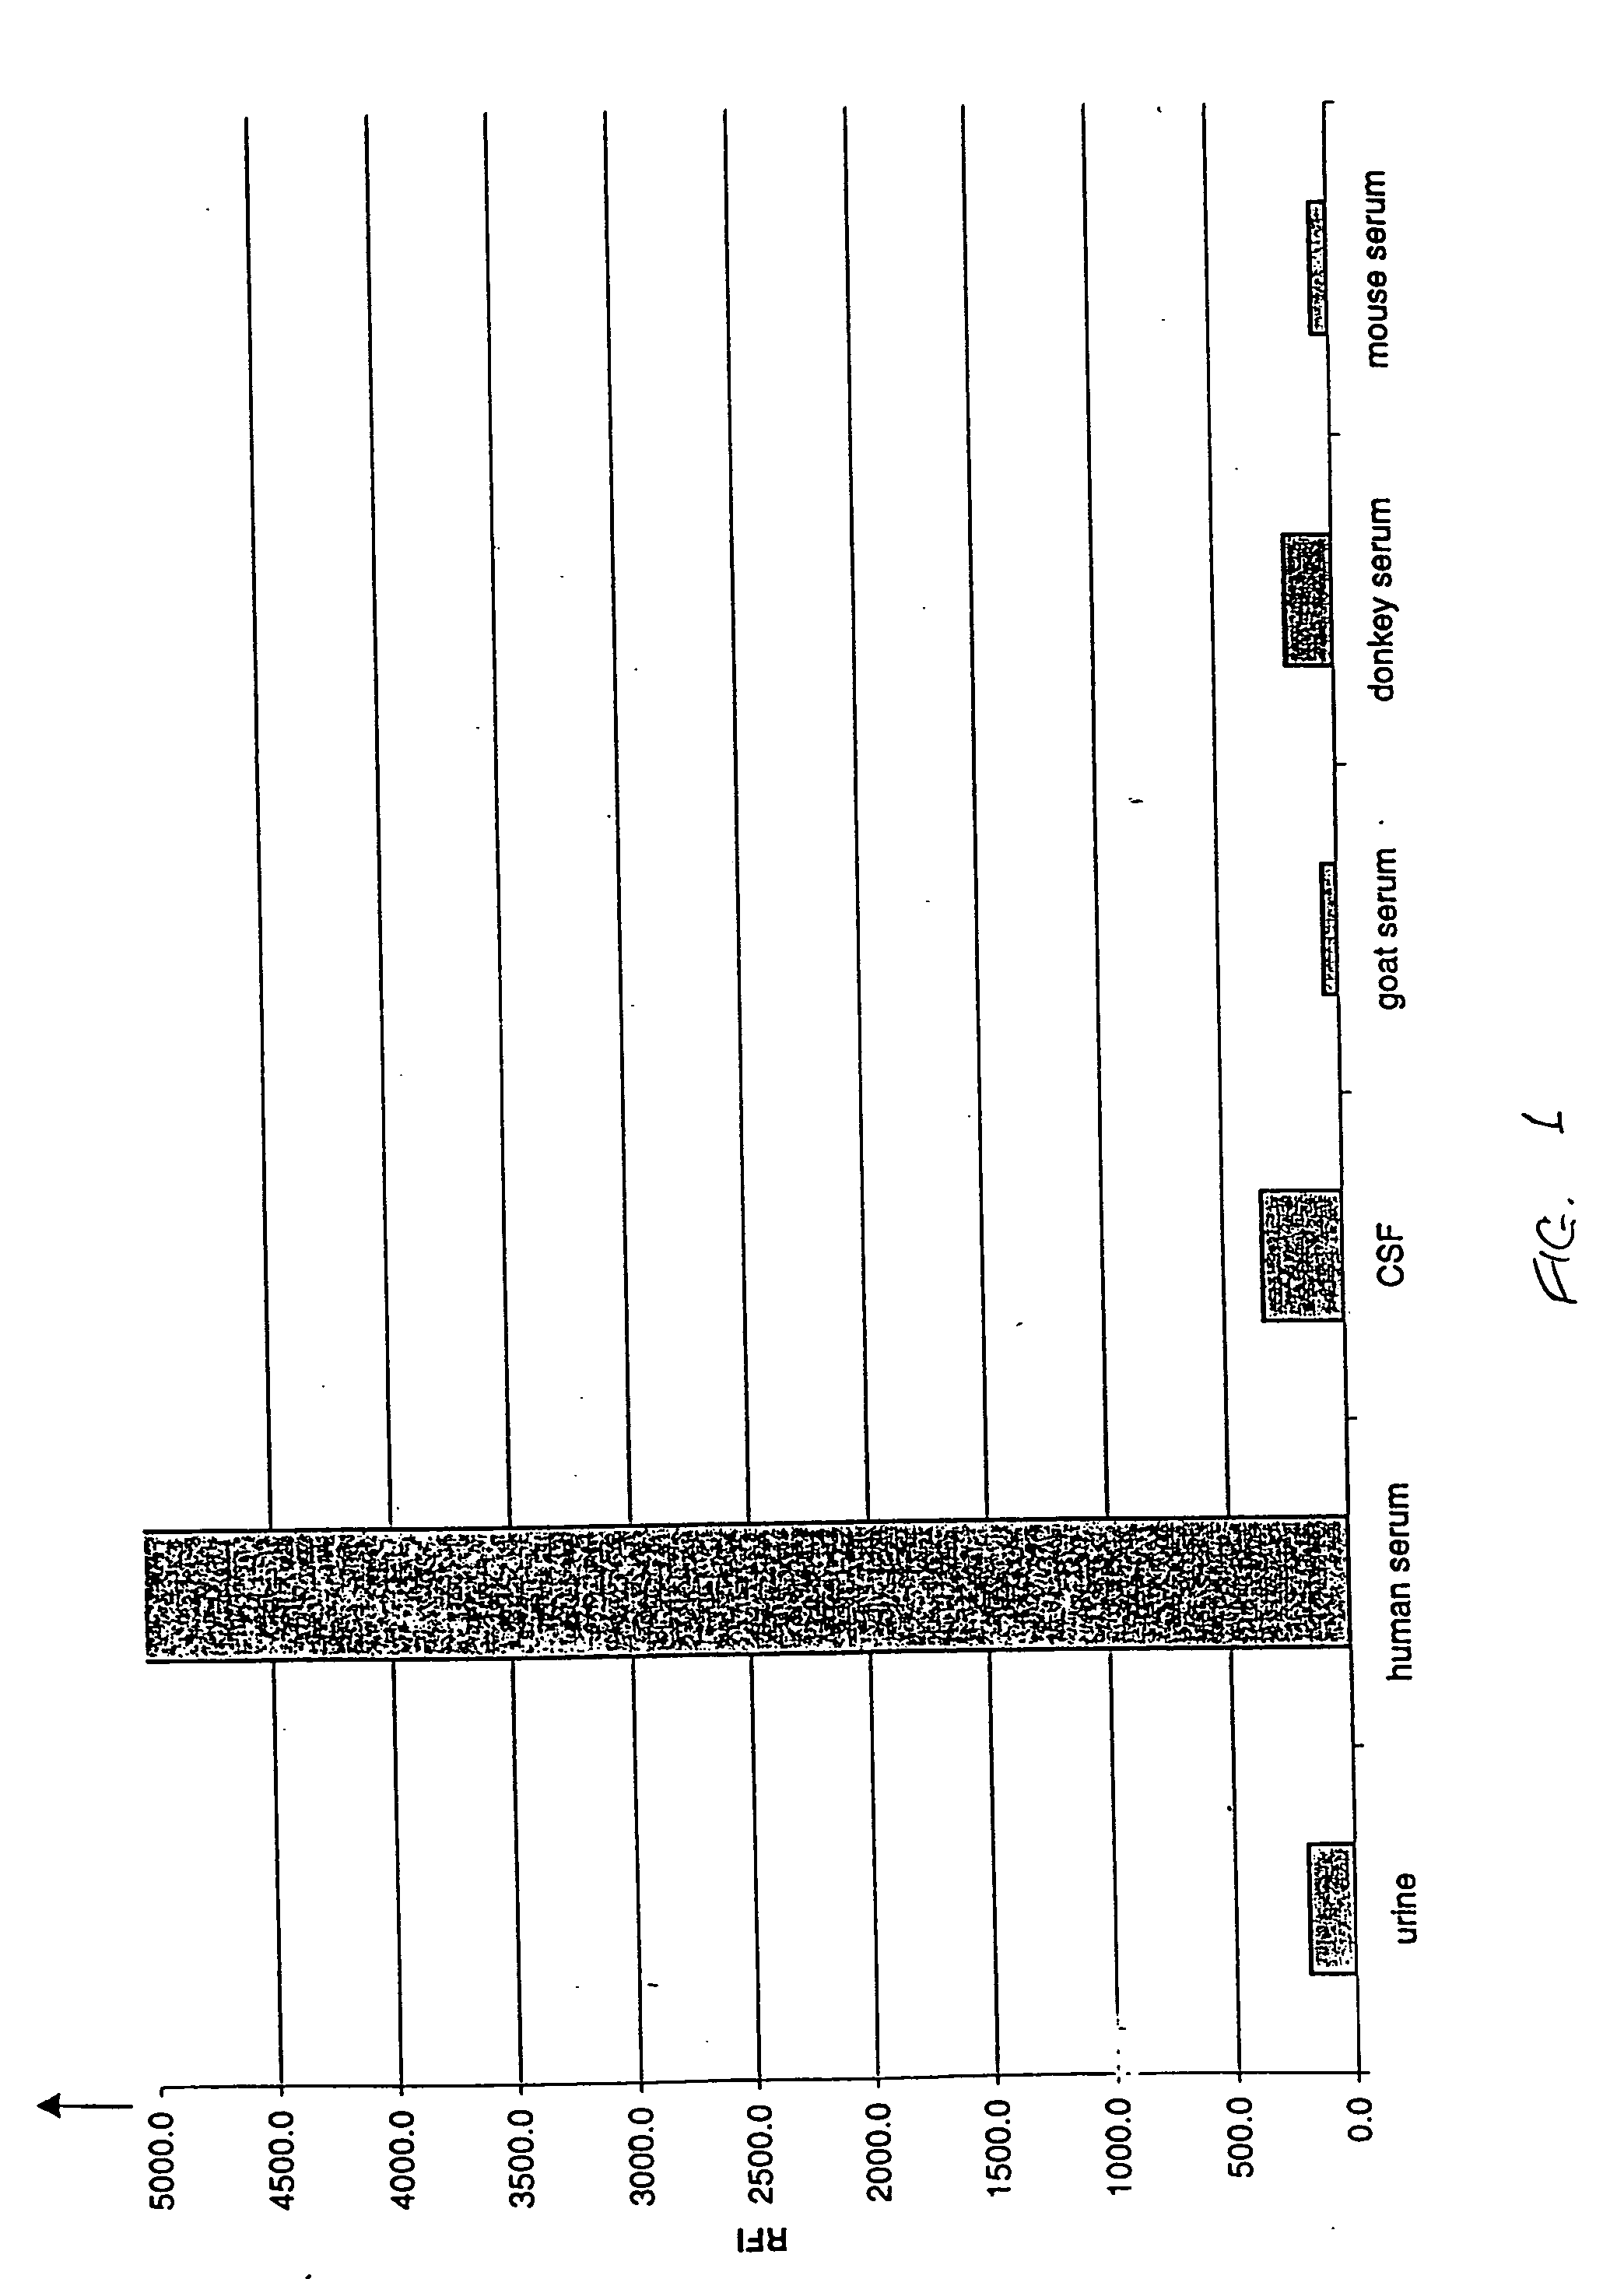 FXIII detection for verifying serum sample and sample size and for detecting dilution